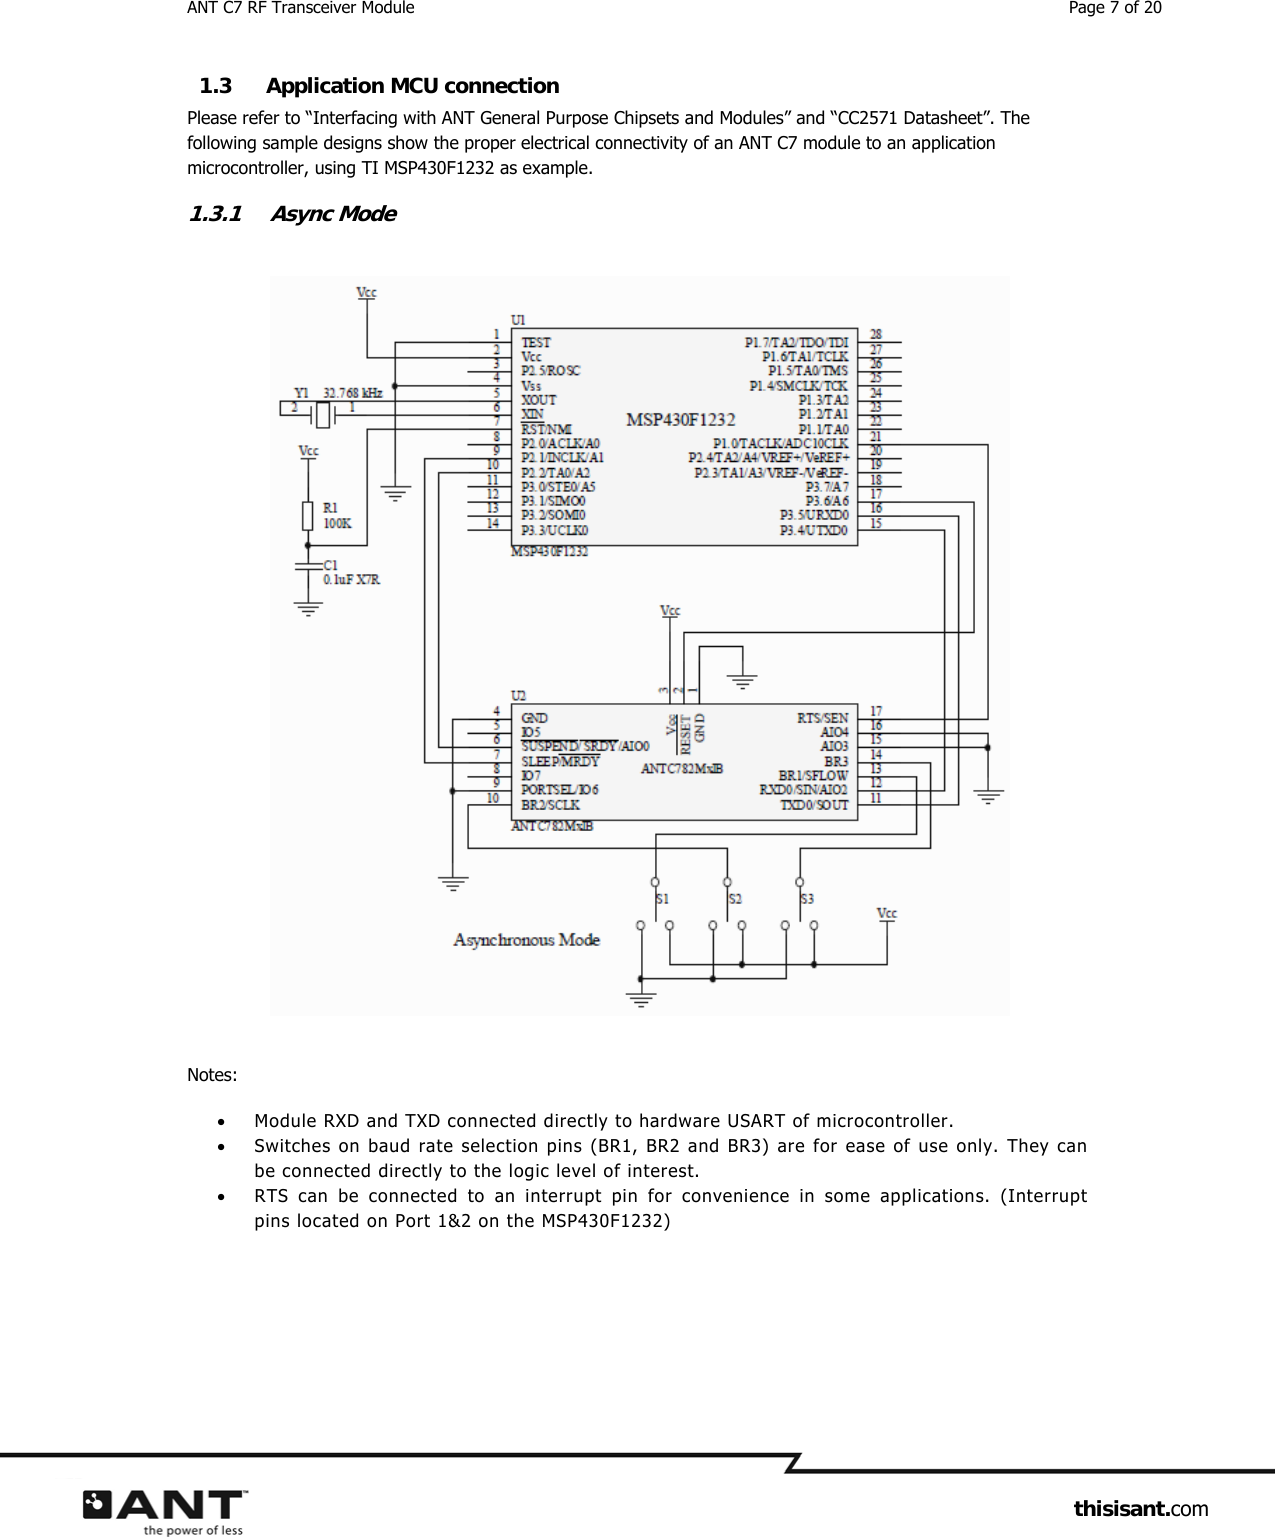 ANT C7 RF Transceiver Module  Page 7 of 20                     thisisant.com 1.3 Application MCU connection Please refer to “Interfacing with ANT General Purpose Chipsets and Modules” and “CC2571 Datasheet”. The following sample designs show the proper electrical connectivity of an ANT C7 module to an application microcontroller, using TI MSP430F1232 as example. 1.3.1 Async Mode   Notes:  Module RXD and TXD connected directly to hardware USART of microcontroller.  Switches on baud rate selection pins (BR1, BR2 and BR3) are for ease of use only. They can be connected directly to the logic level of interest.  RTS can be connected to an interrupt pin for convenience in some applications. (Interrupt pins located on Port 1&amp;2 on the MSP430F1232)   